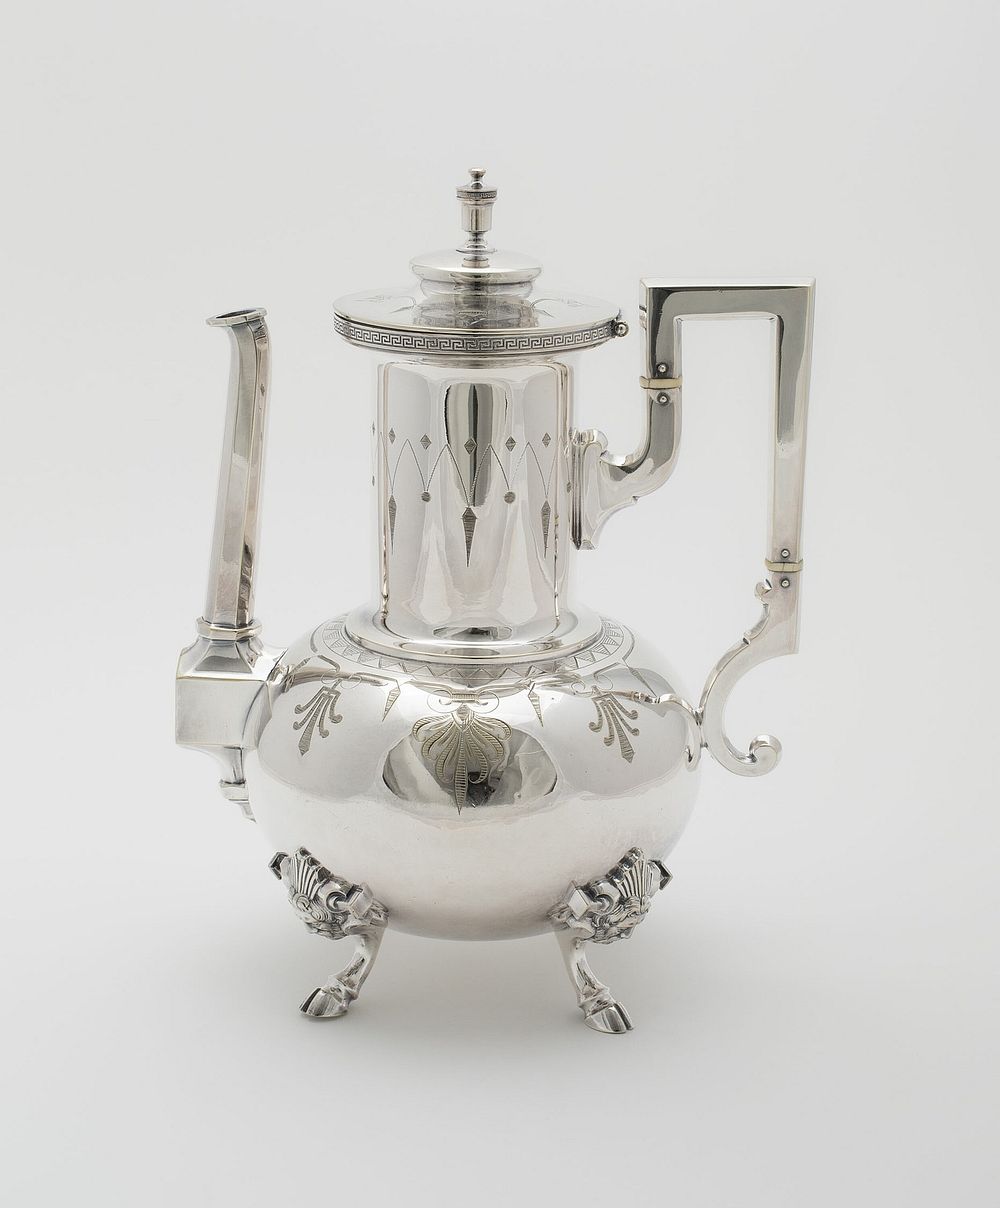 Coffee Pot, part of Tea and Coffee Service by Rogers and Smith Company (Maker)